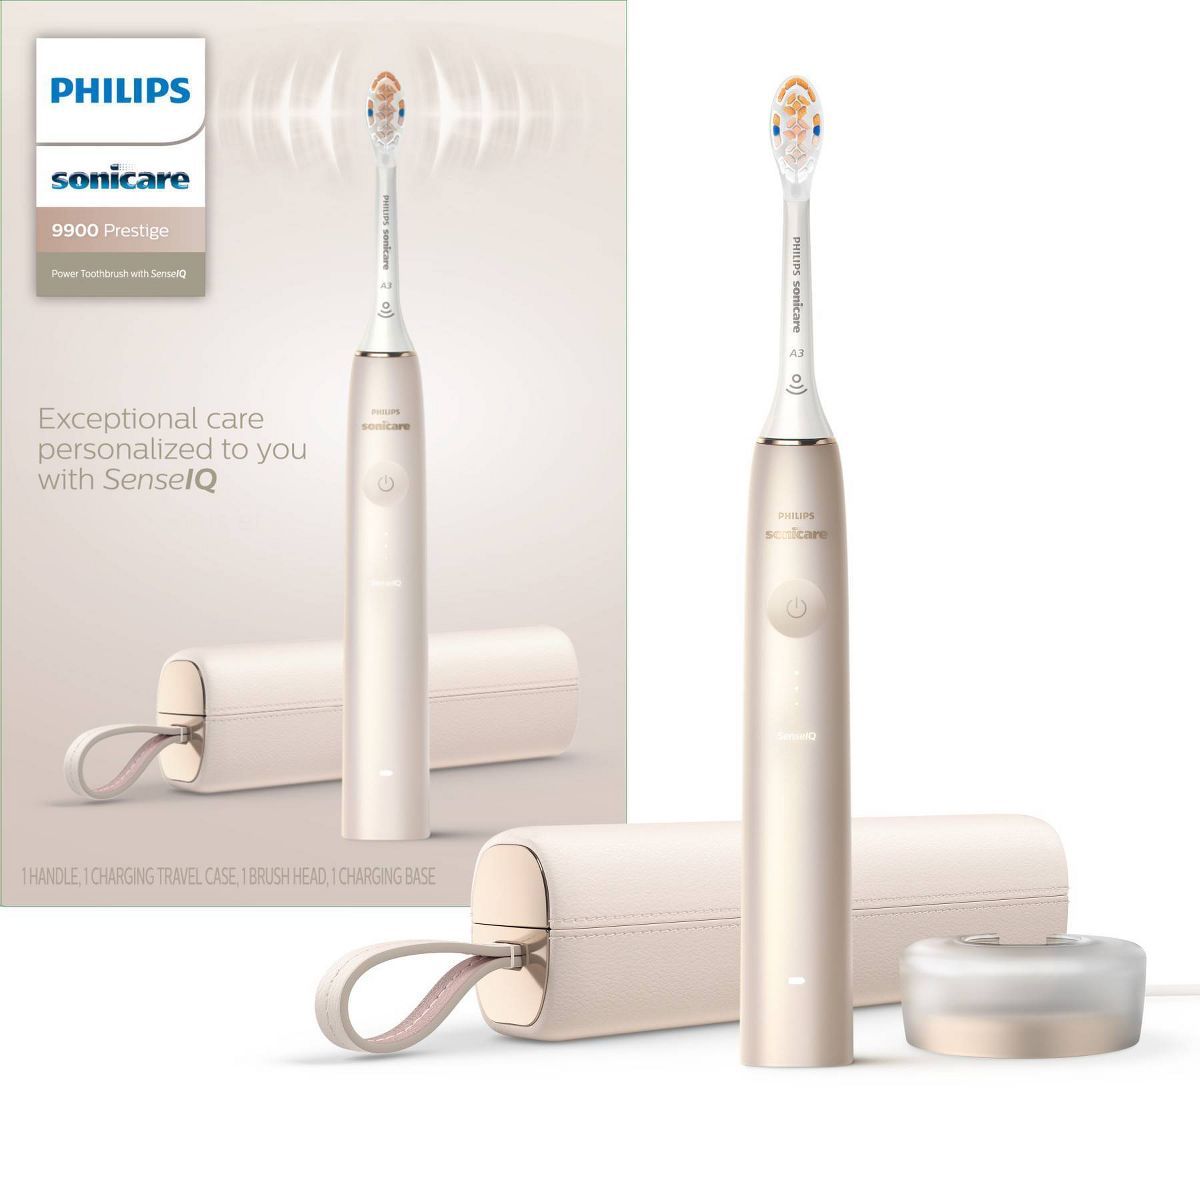 Philips Sonicare 9900 Prestige Rechargeable Electric Toothbrush - HX9990/11 - Champagne | Target